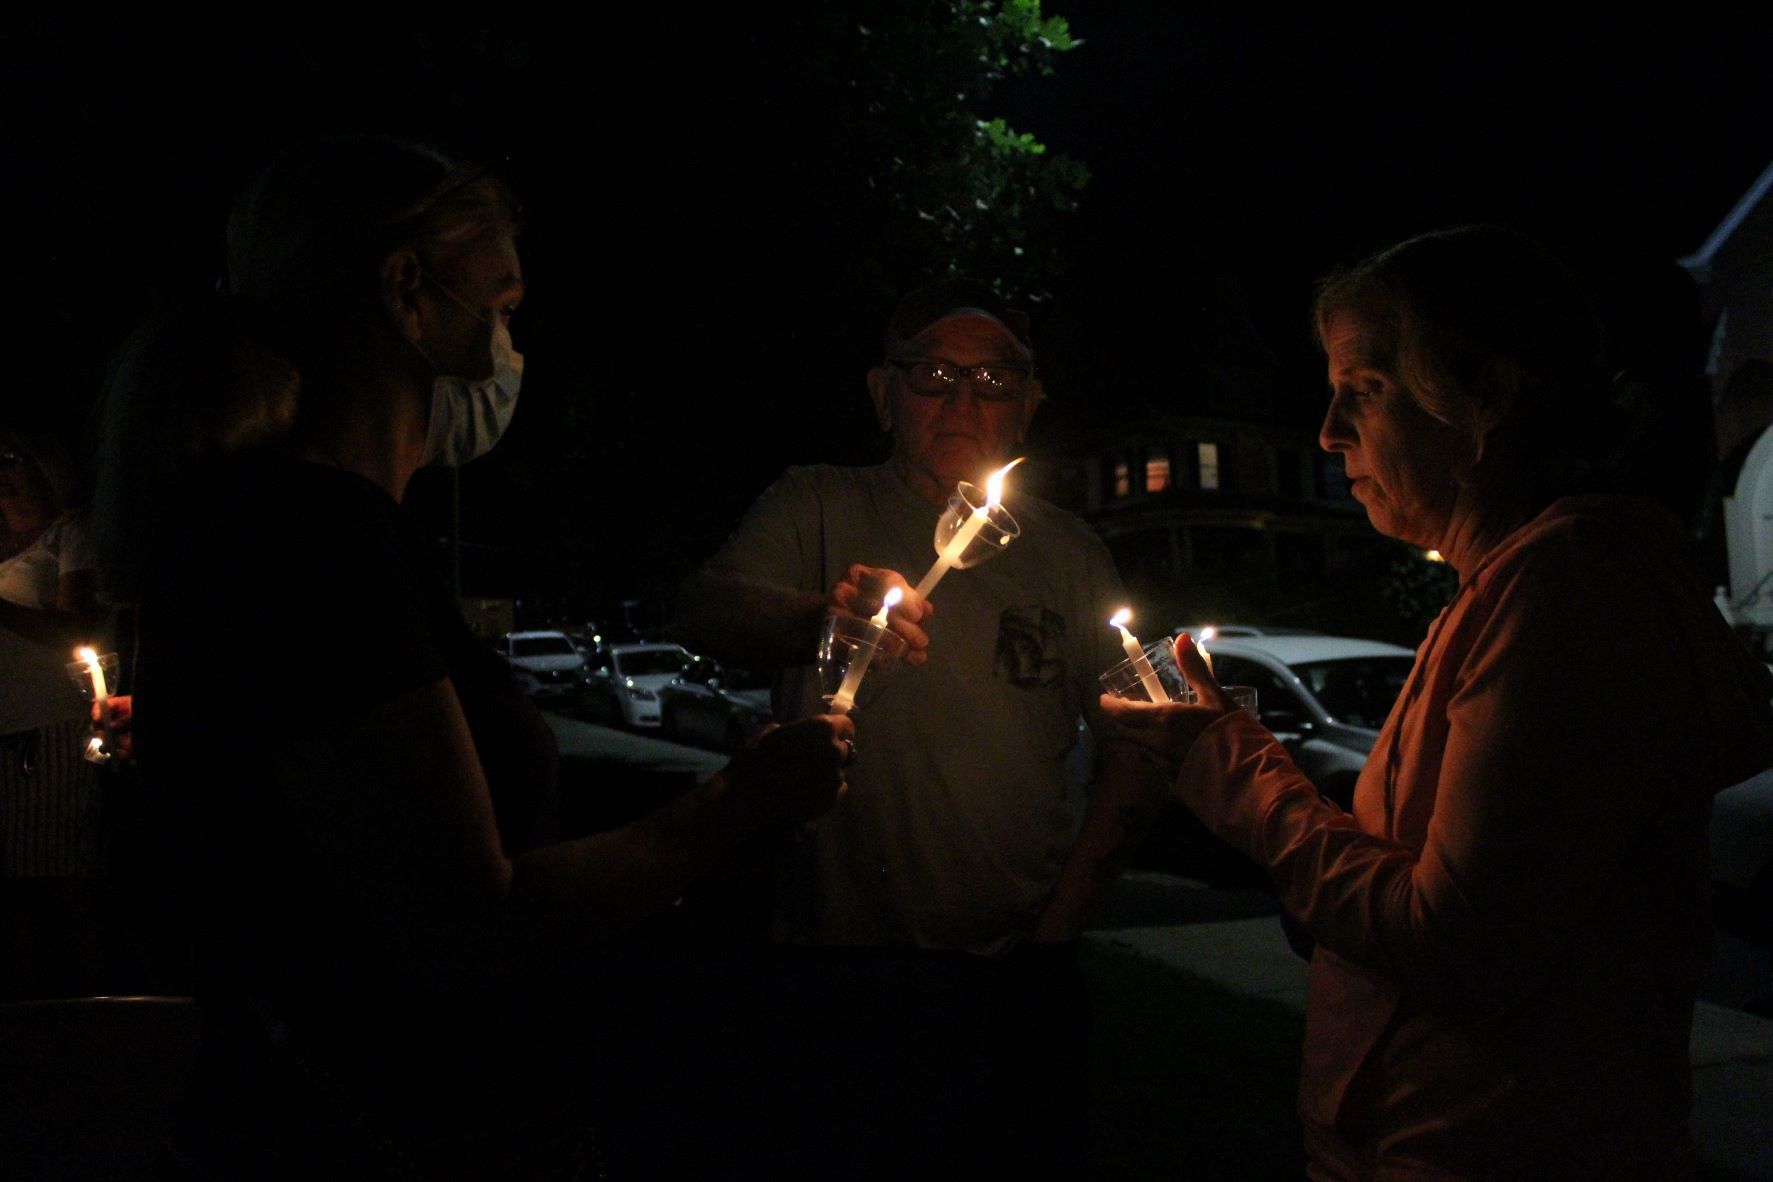 People hold candles in front of the Walker Building. (Laura Hayes)